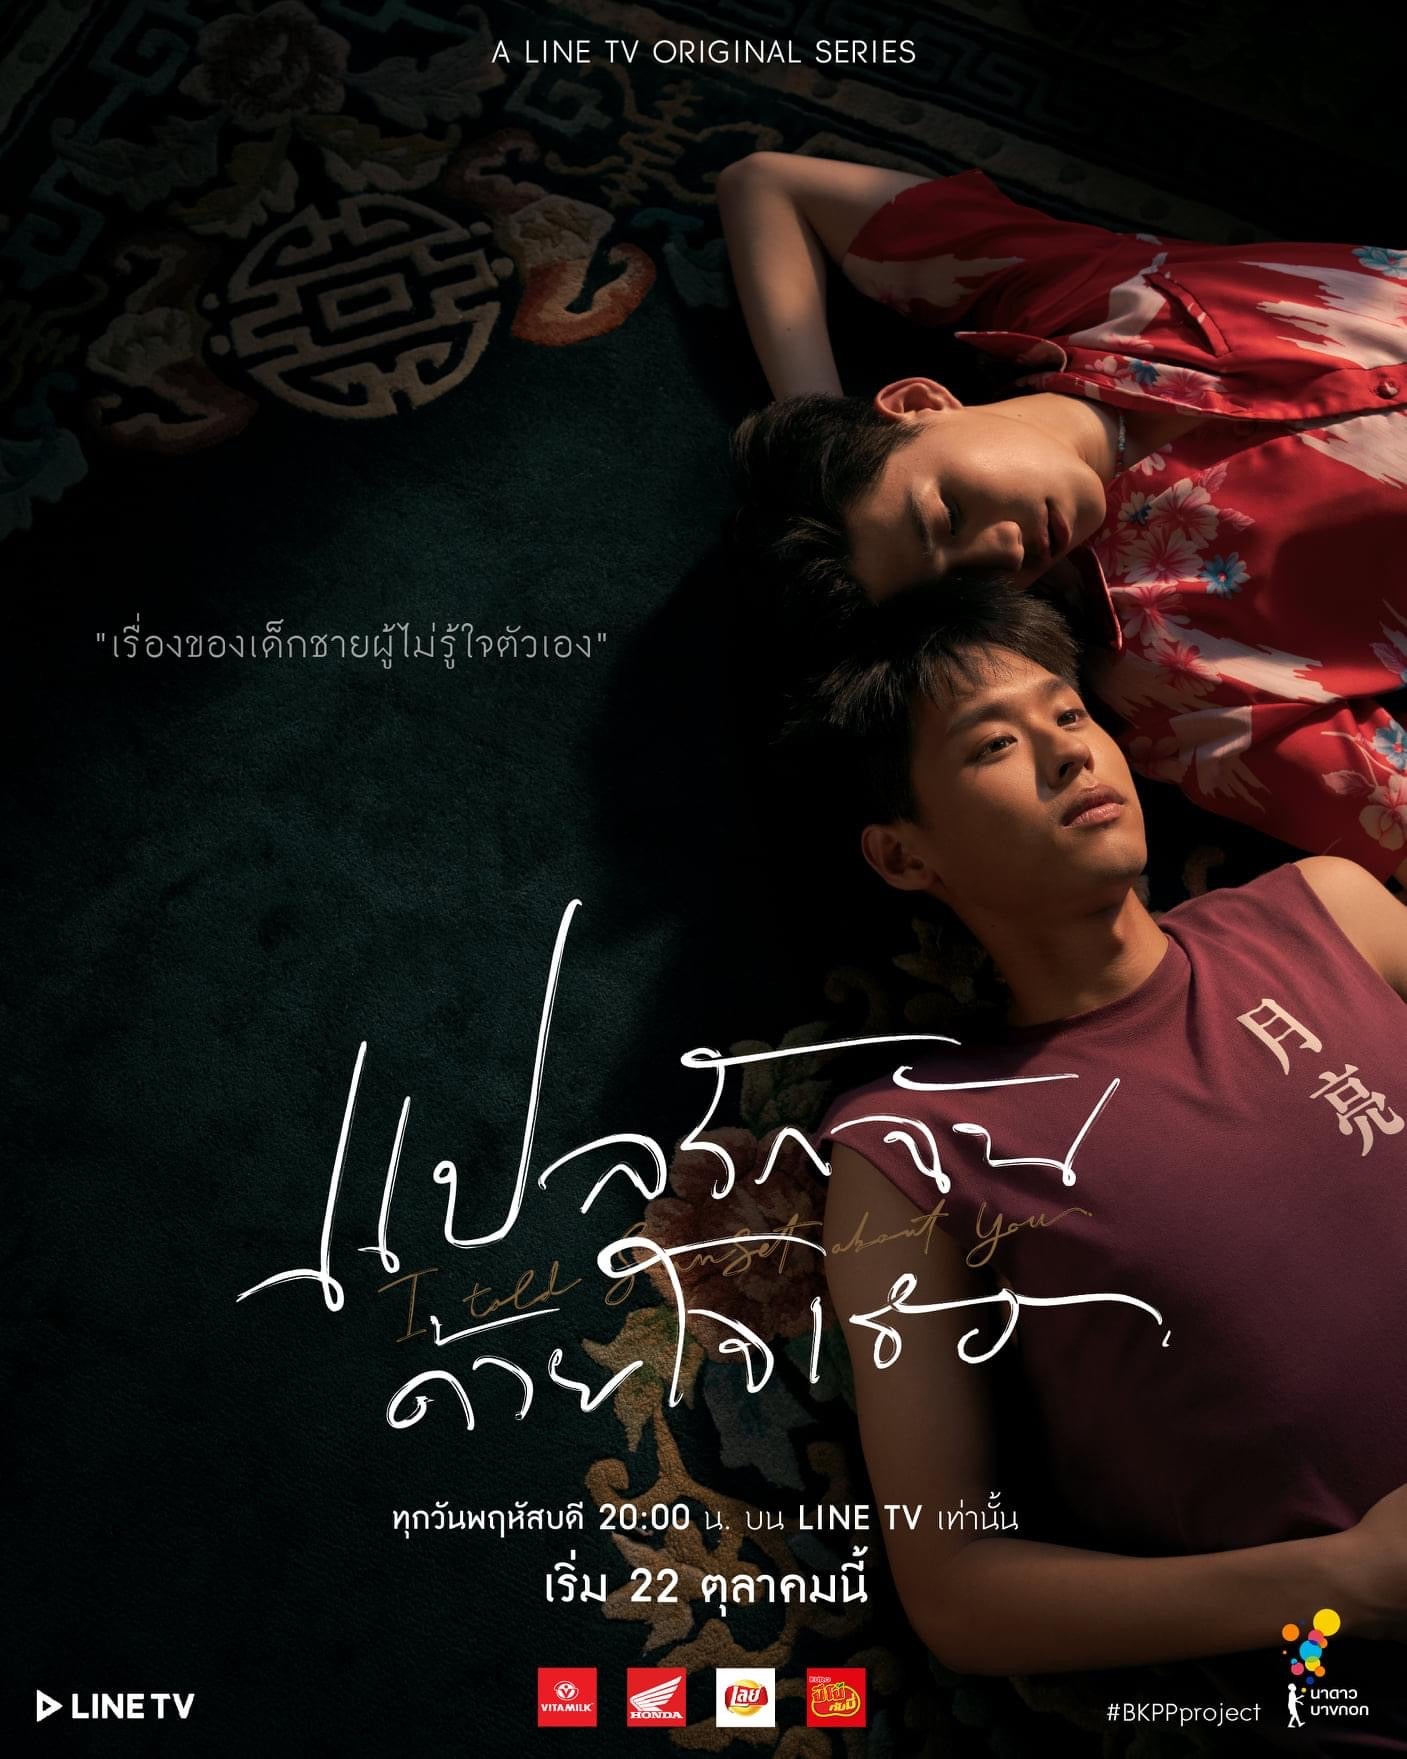 TV ratings for I Told Sunset About You (แปลรักฉันด้วยใจเธอ) in France. line tv TV series